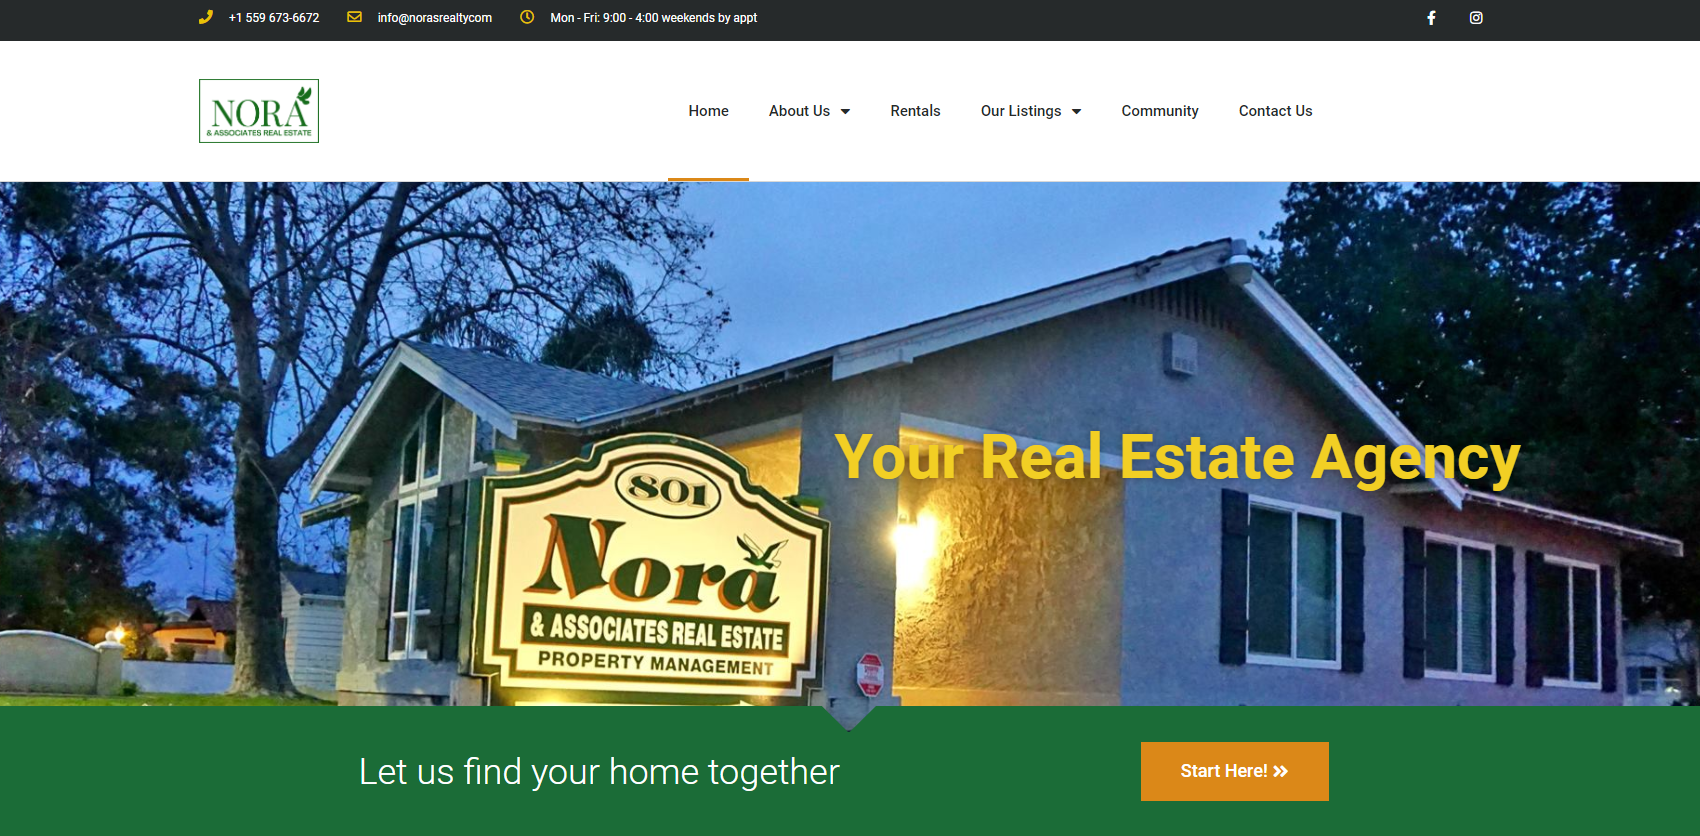 Nora's Realty site